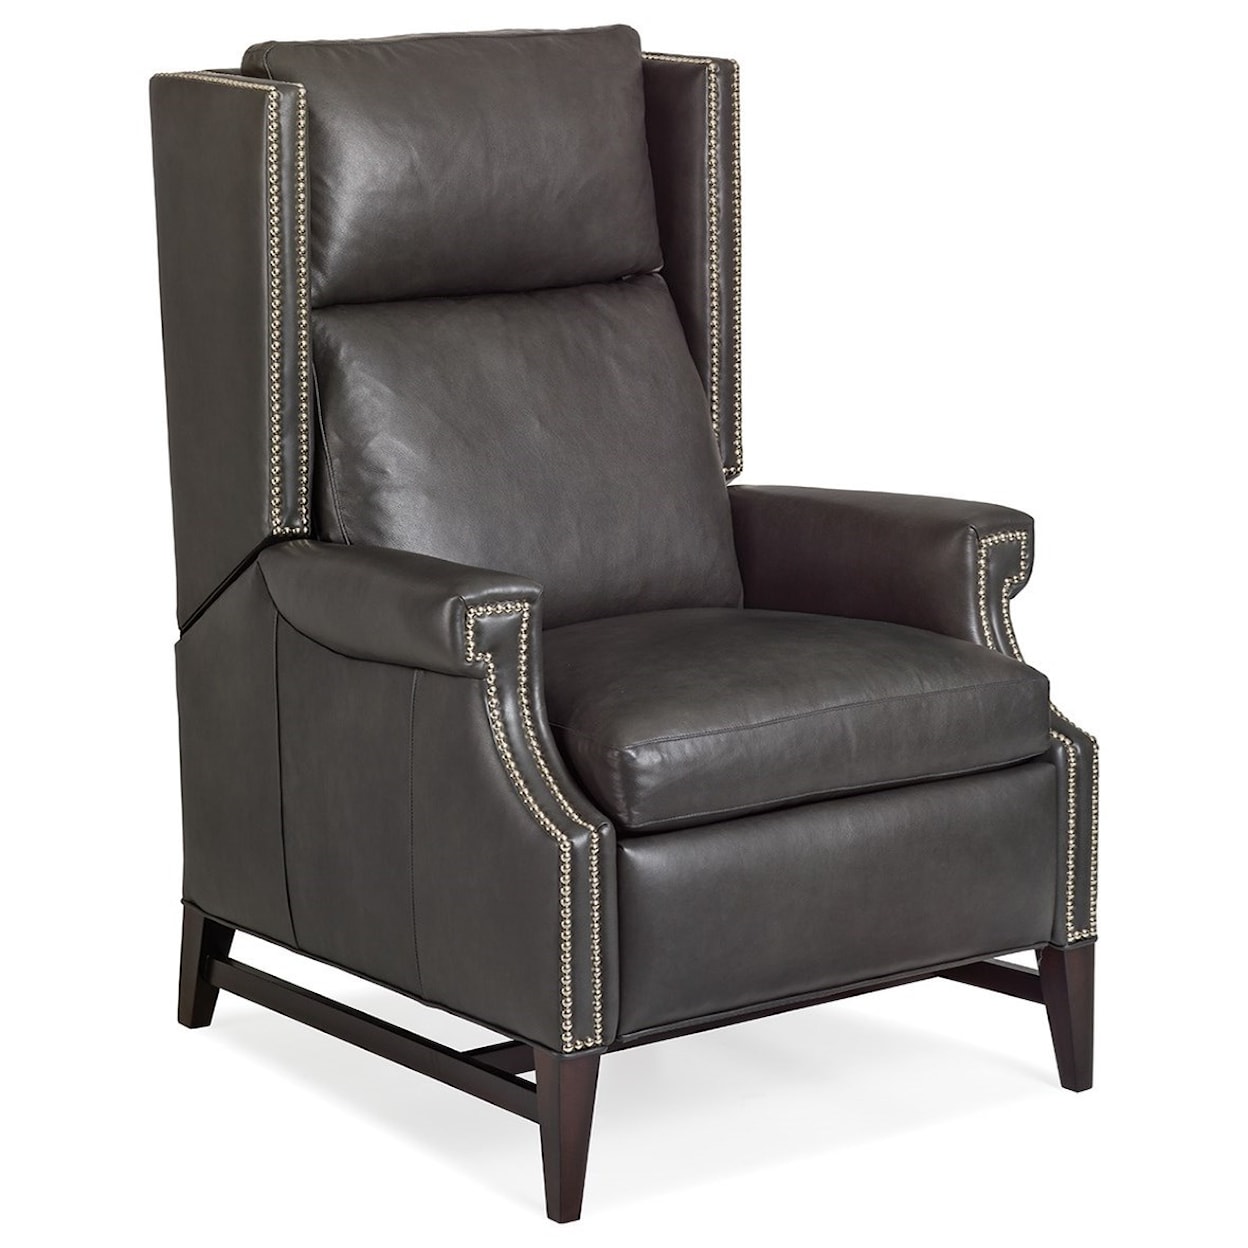 Hancock & Moore Motion Seating Marcus Recliner